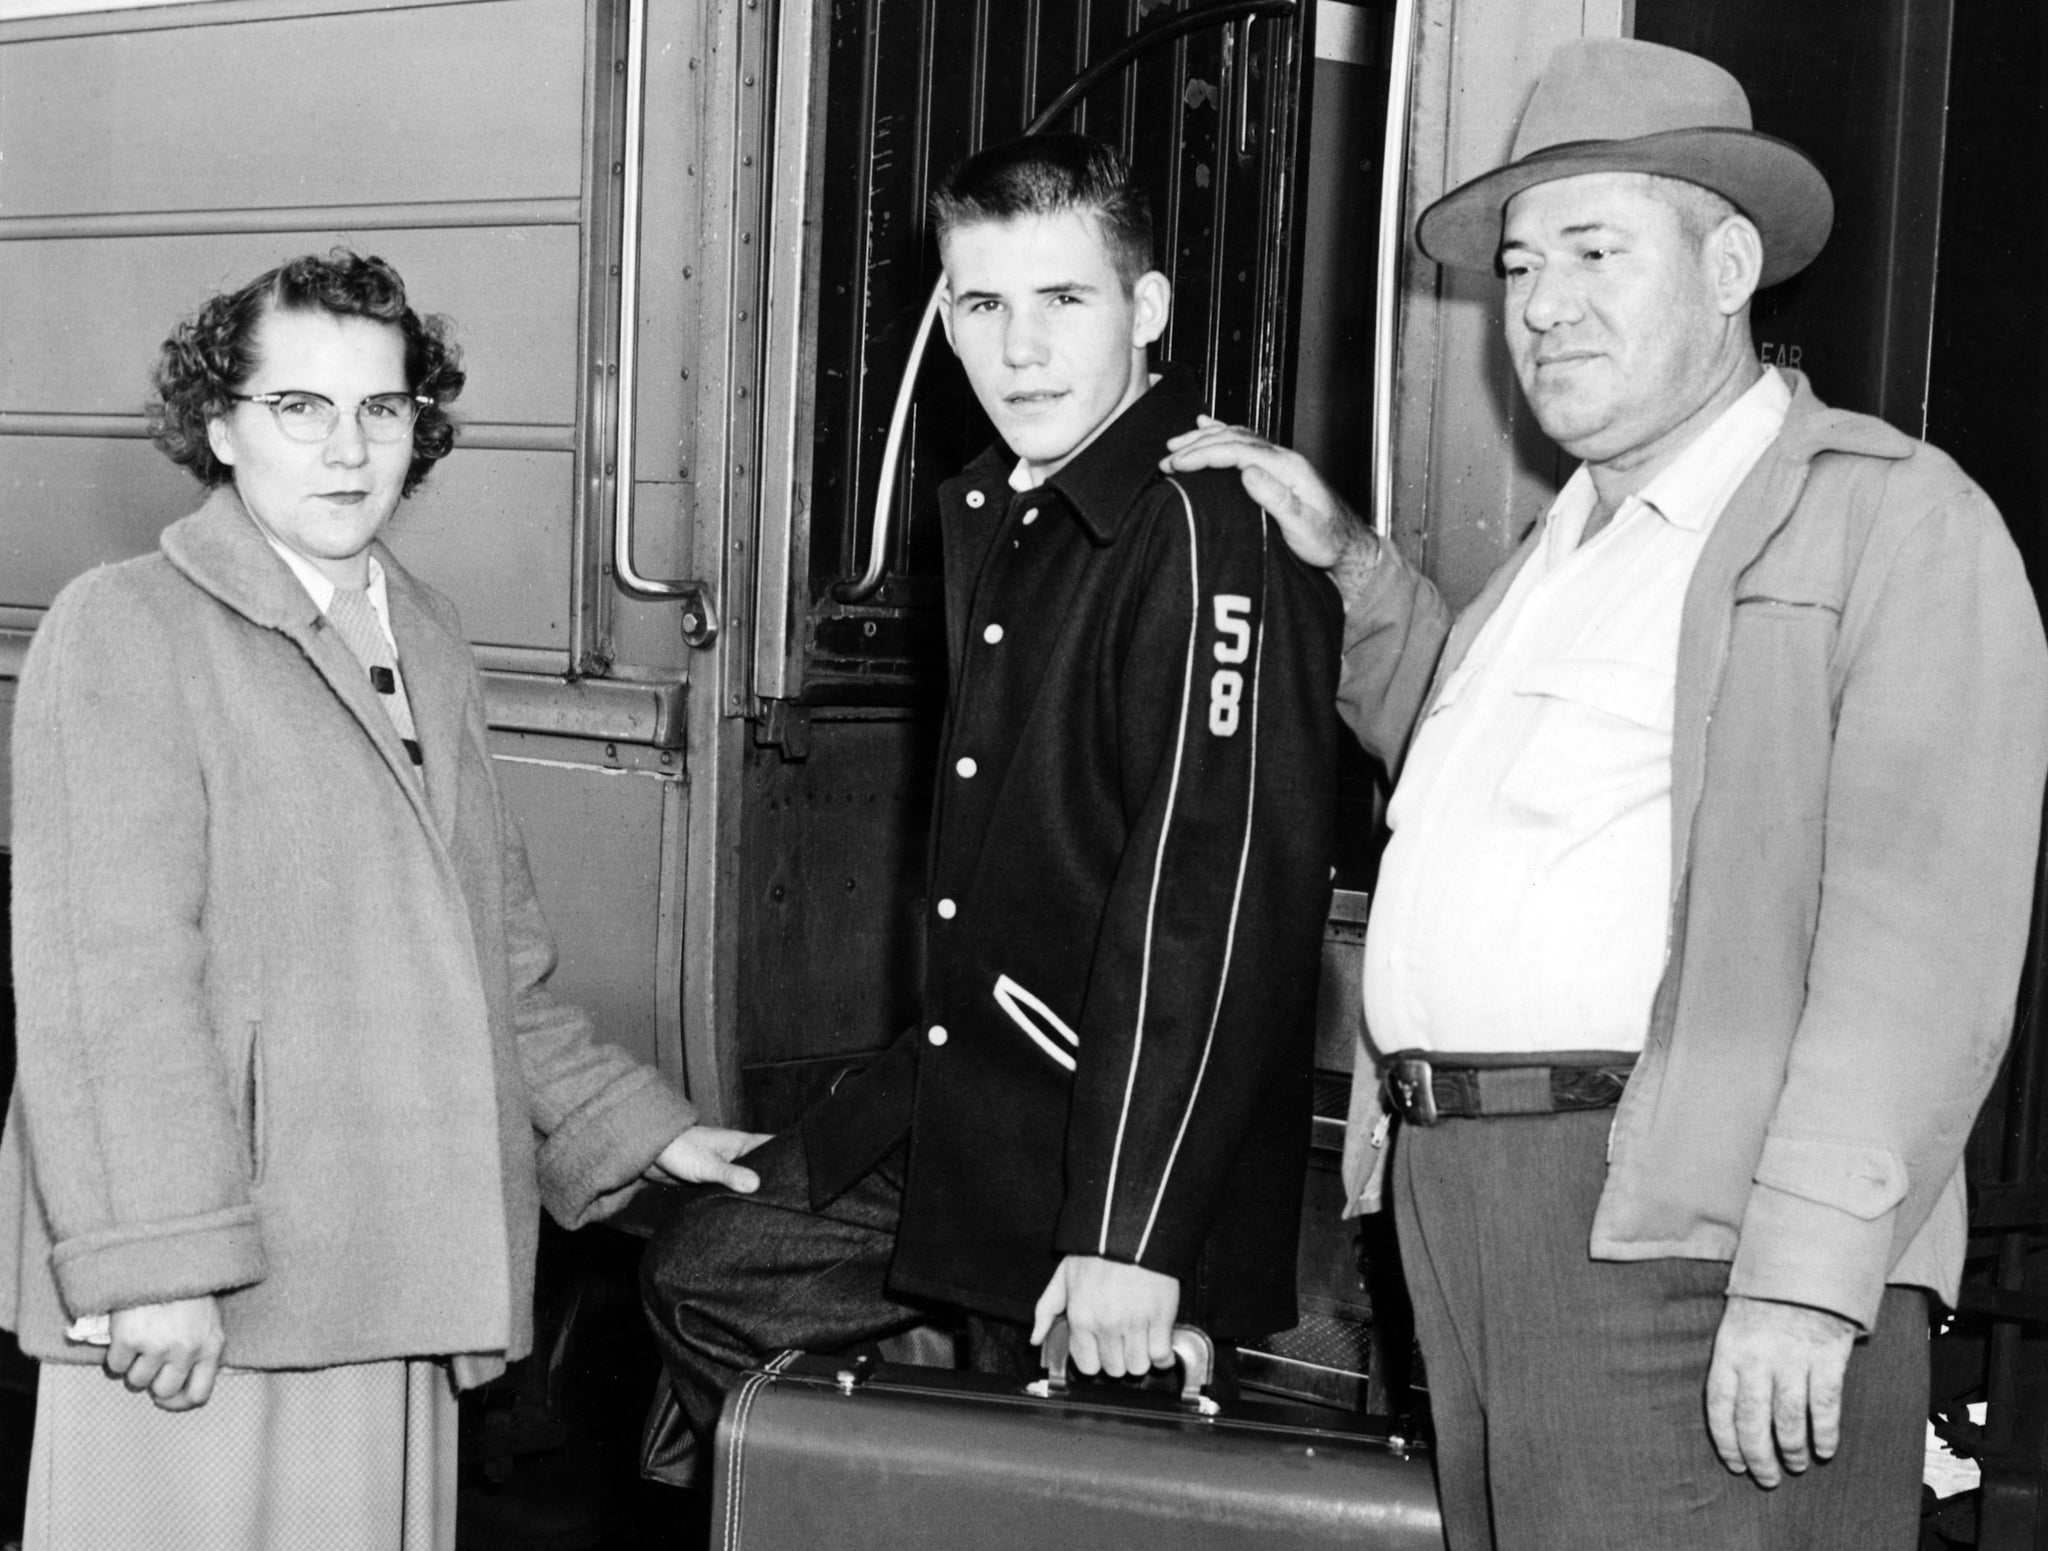 Gladys and Philip Bell seeing their son, Wayne Bell, off at the Billings train depot, 1958. Wayne was heading to compete at the Golden Gloves Boxing competition in Chicago. -- COURTESY WAYNE BELL